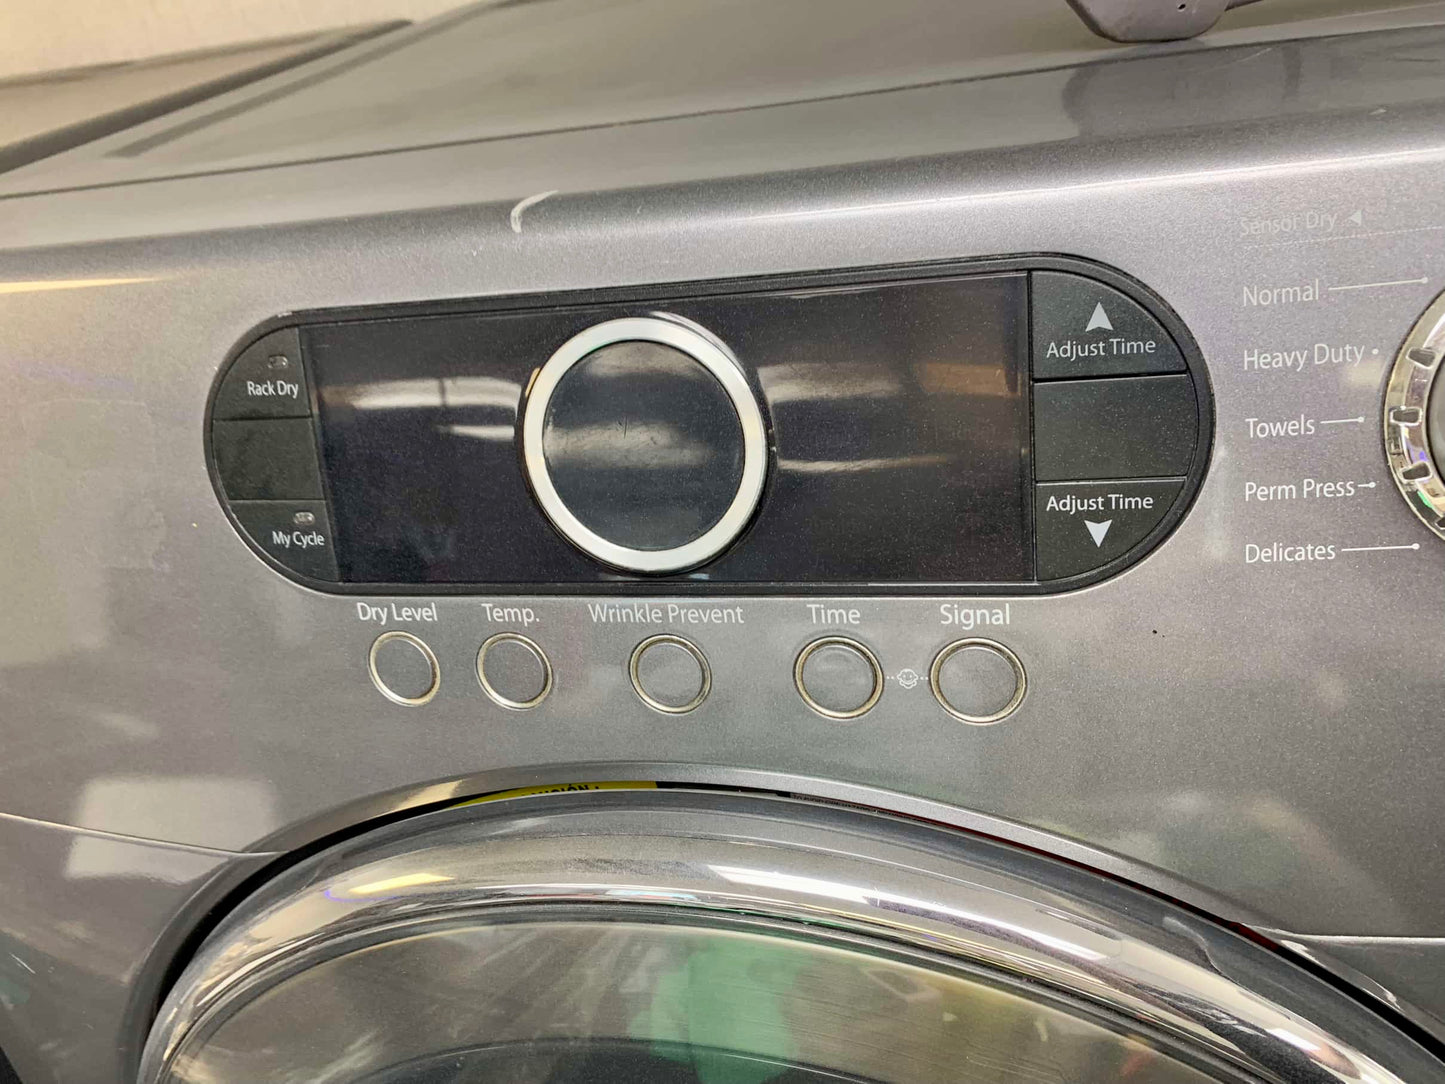 Samsung front load electric dryer 220v stackable stainless steel 27”